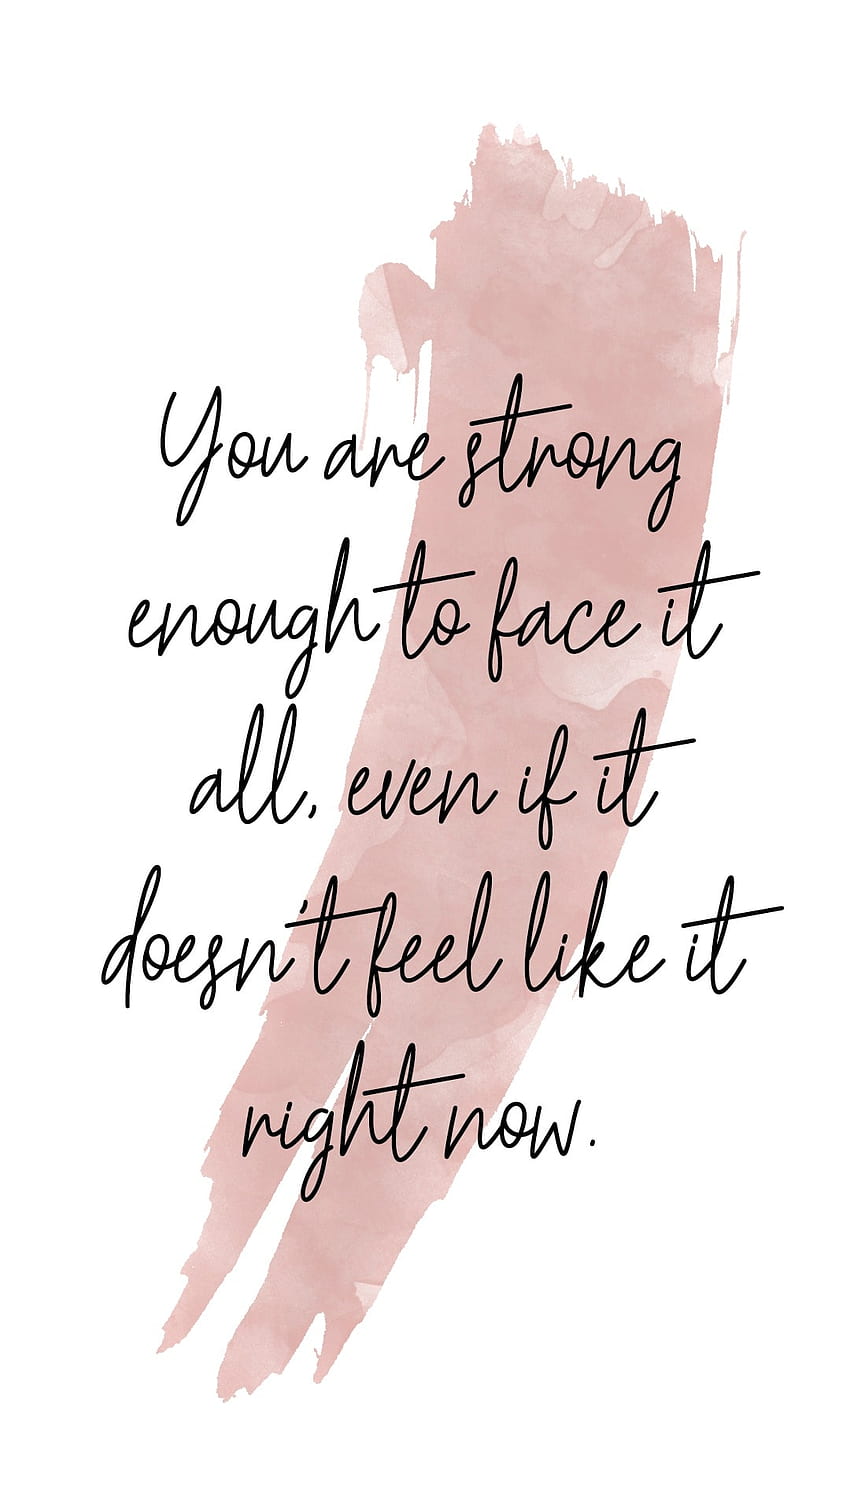 Inspirational quotes, Motivational mantras, quotes to live by, quote of the day, self care quotes, quotes, comforting quotes, the best quotes, Strong Quote HD phone wallpaper